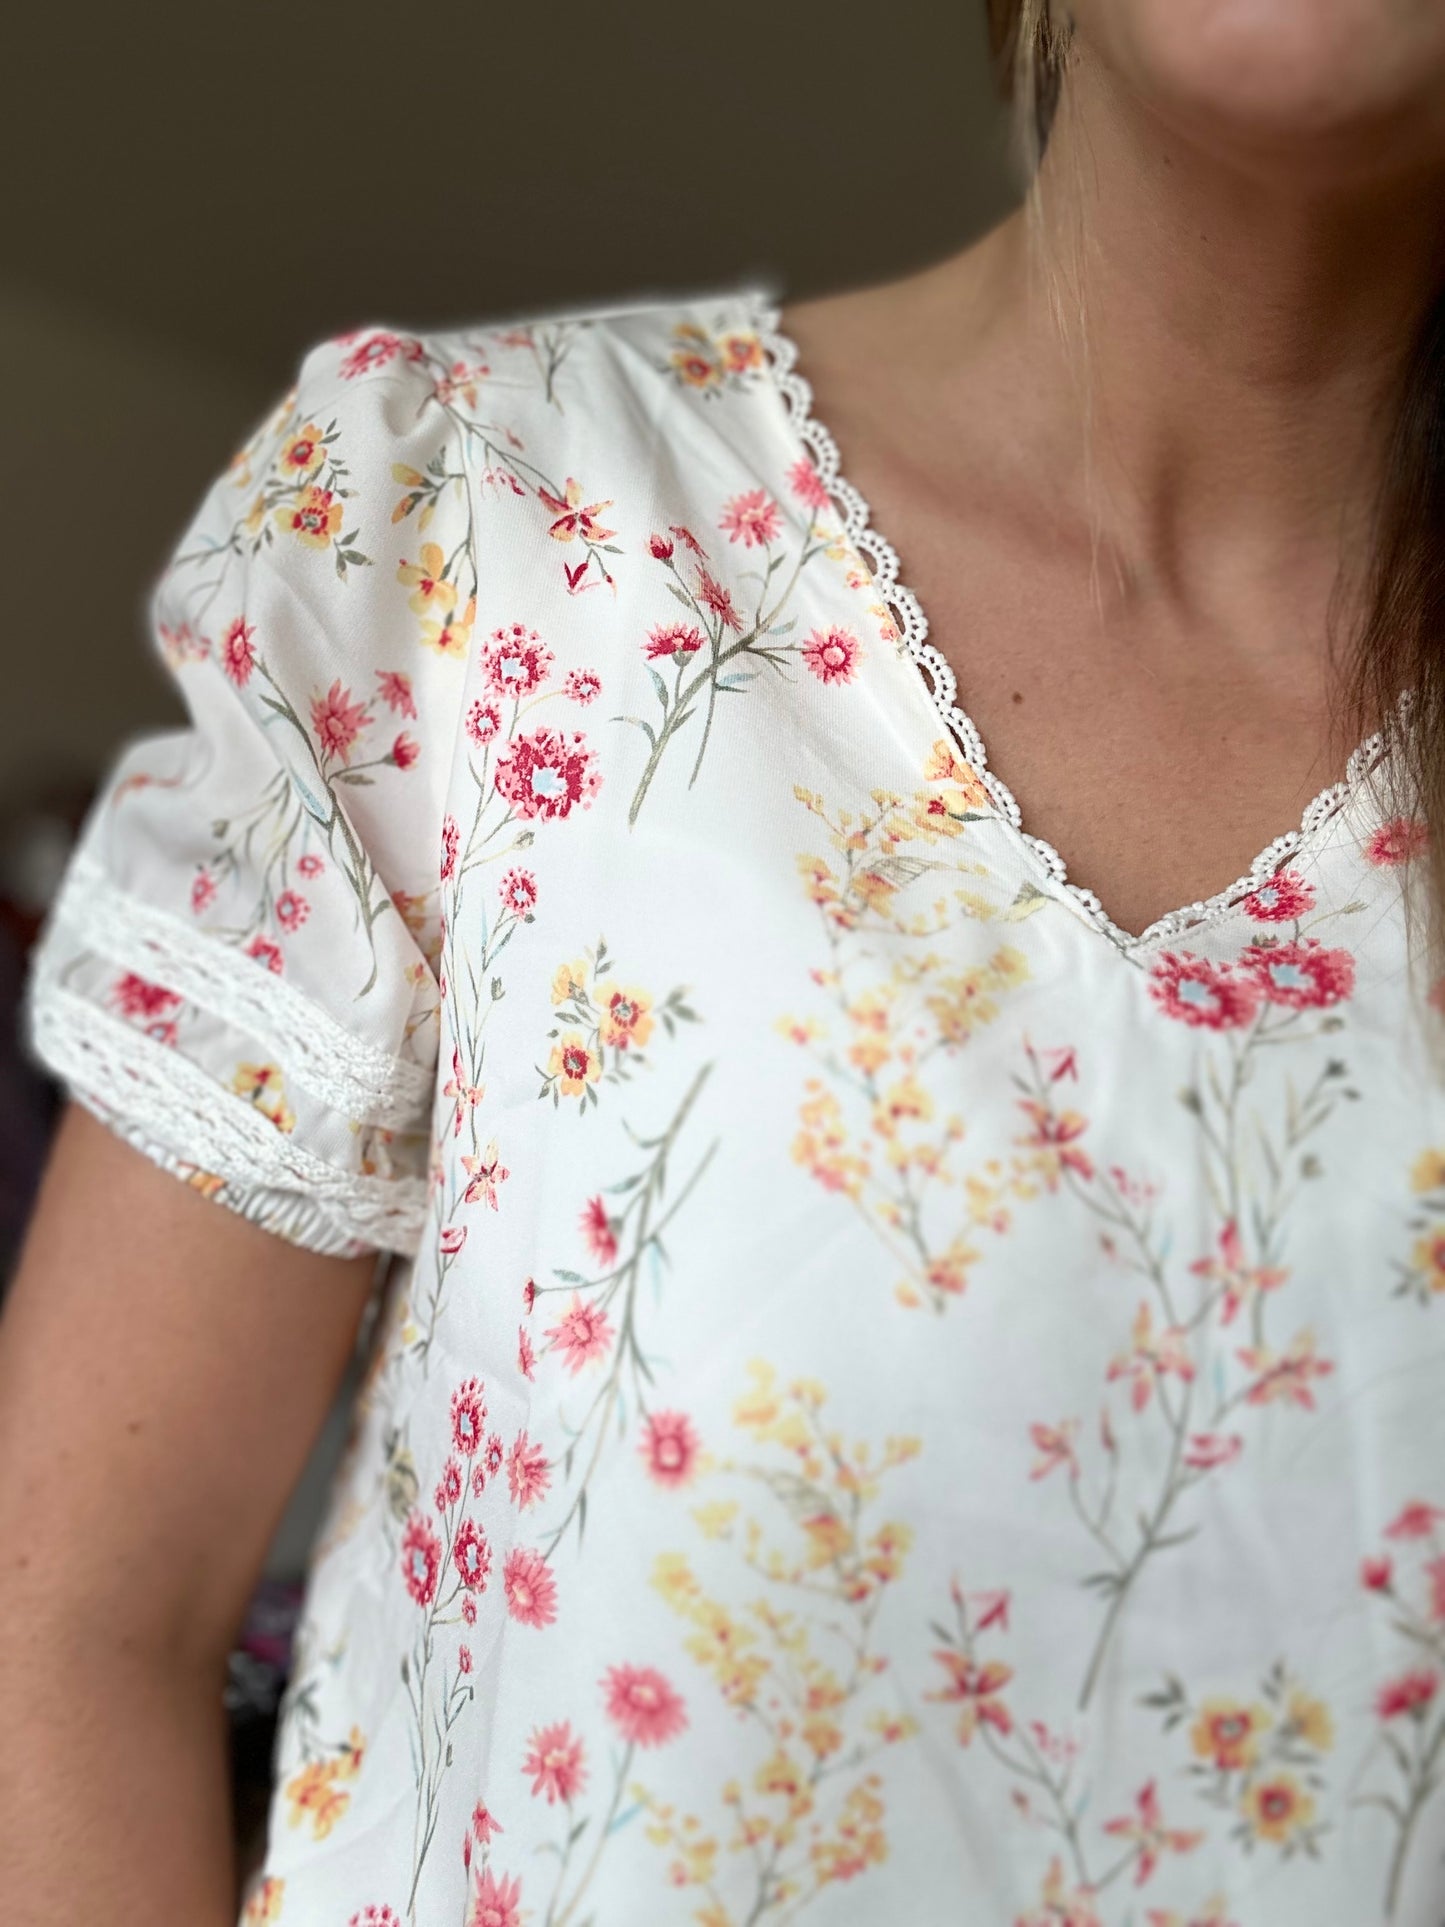 Floral Scalloped Blouse